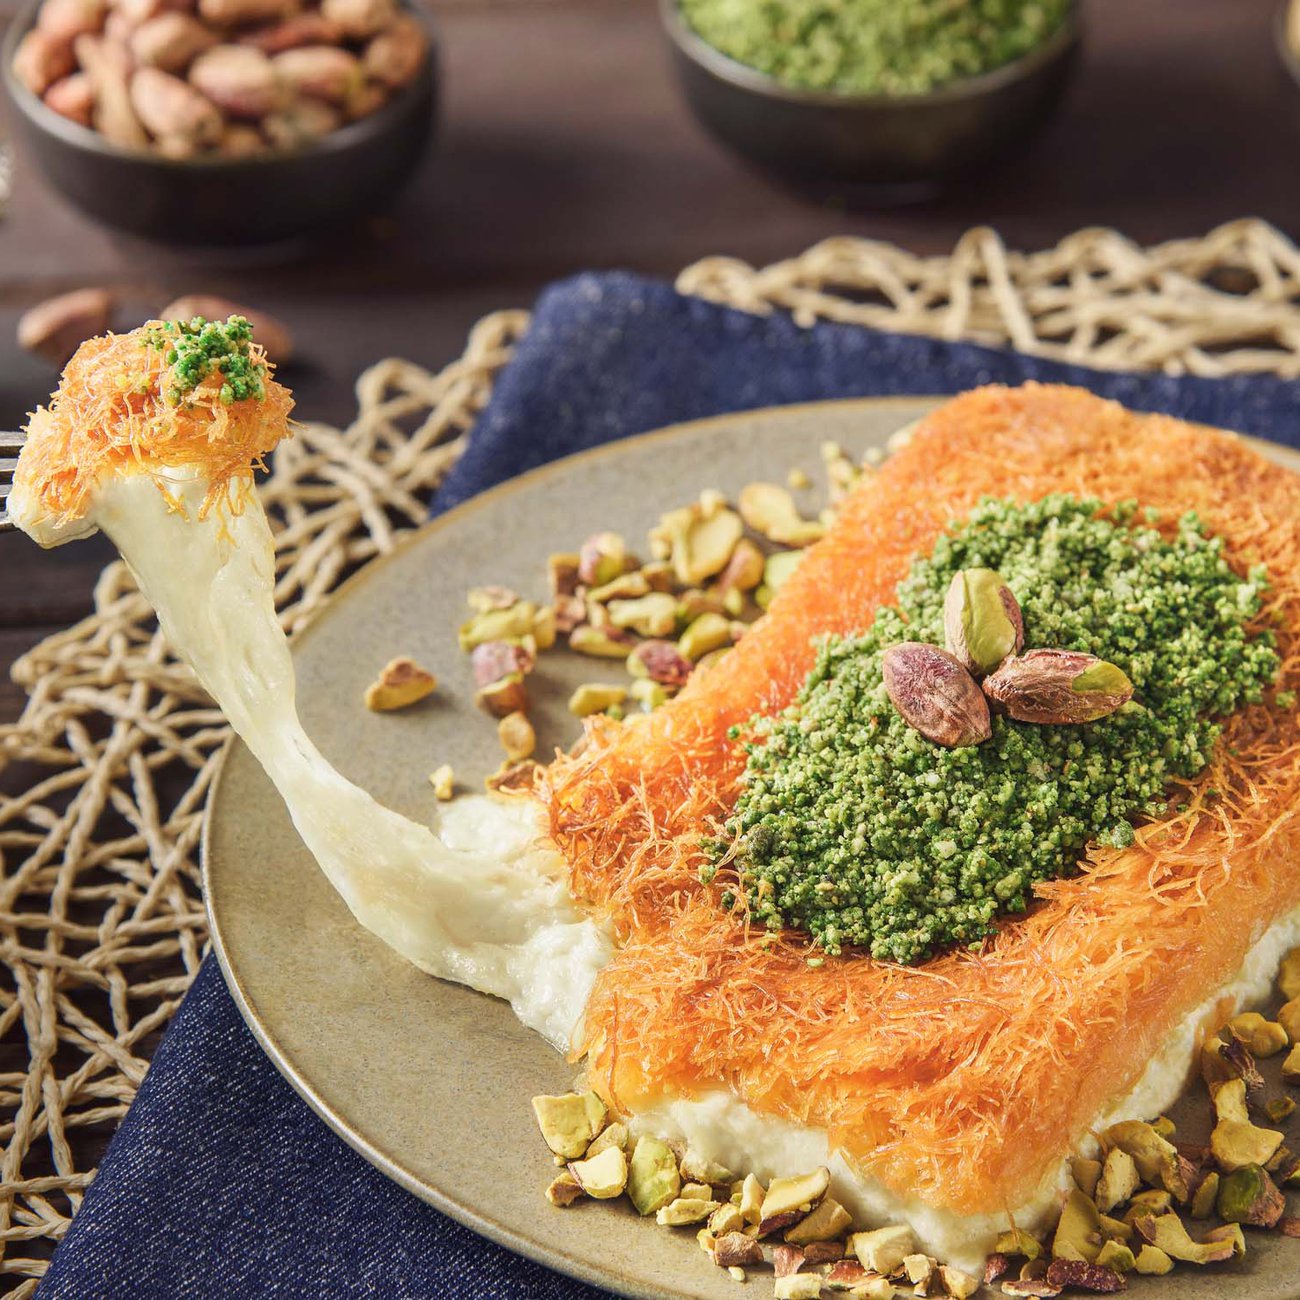 Kunafa's cheese centre is deliciously gooey